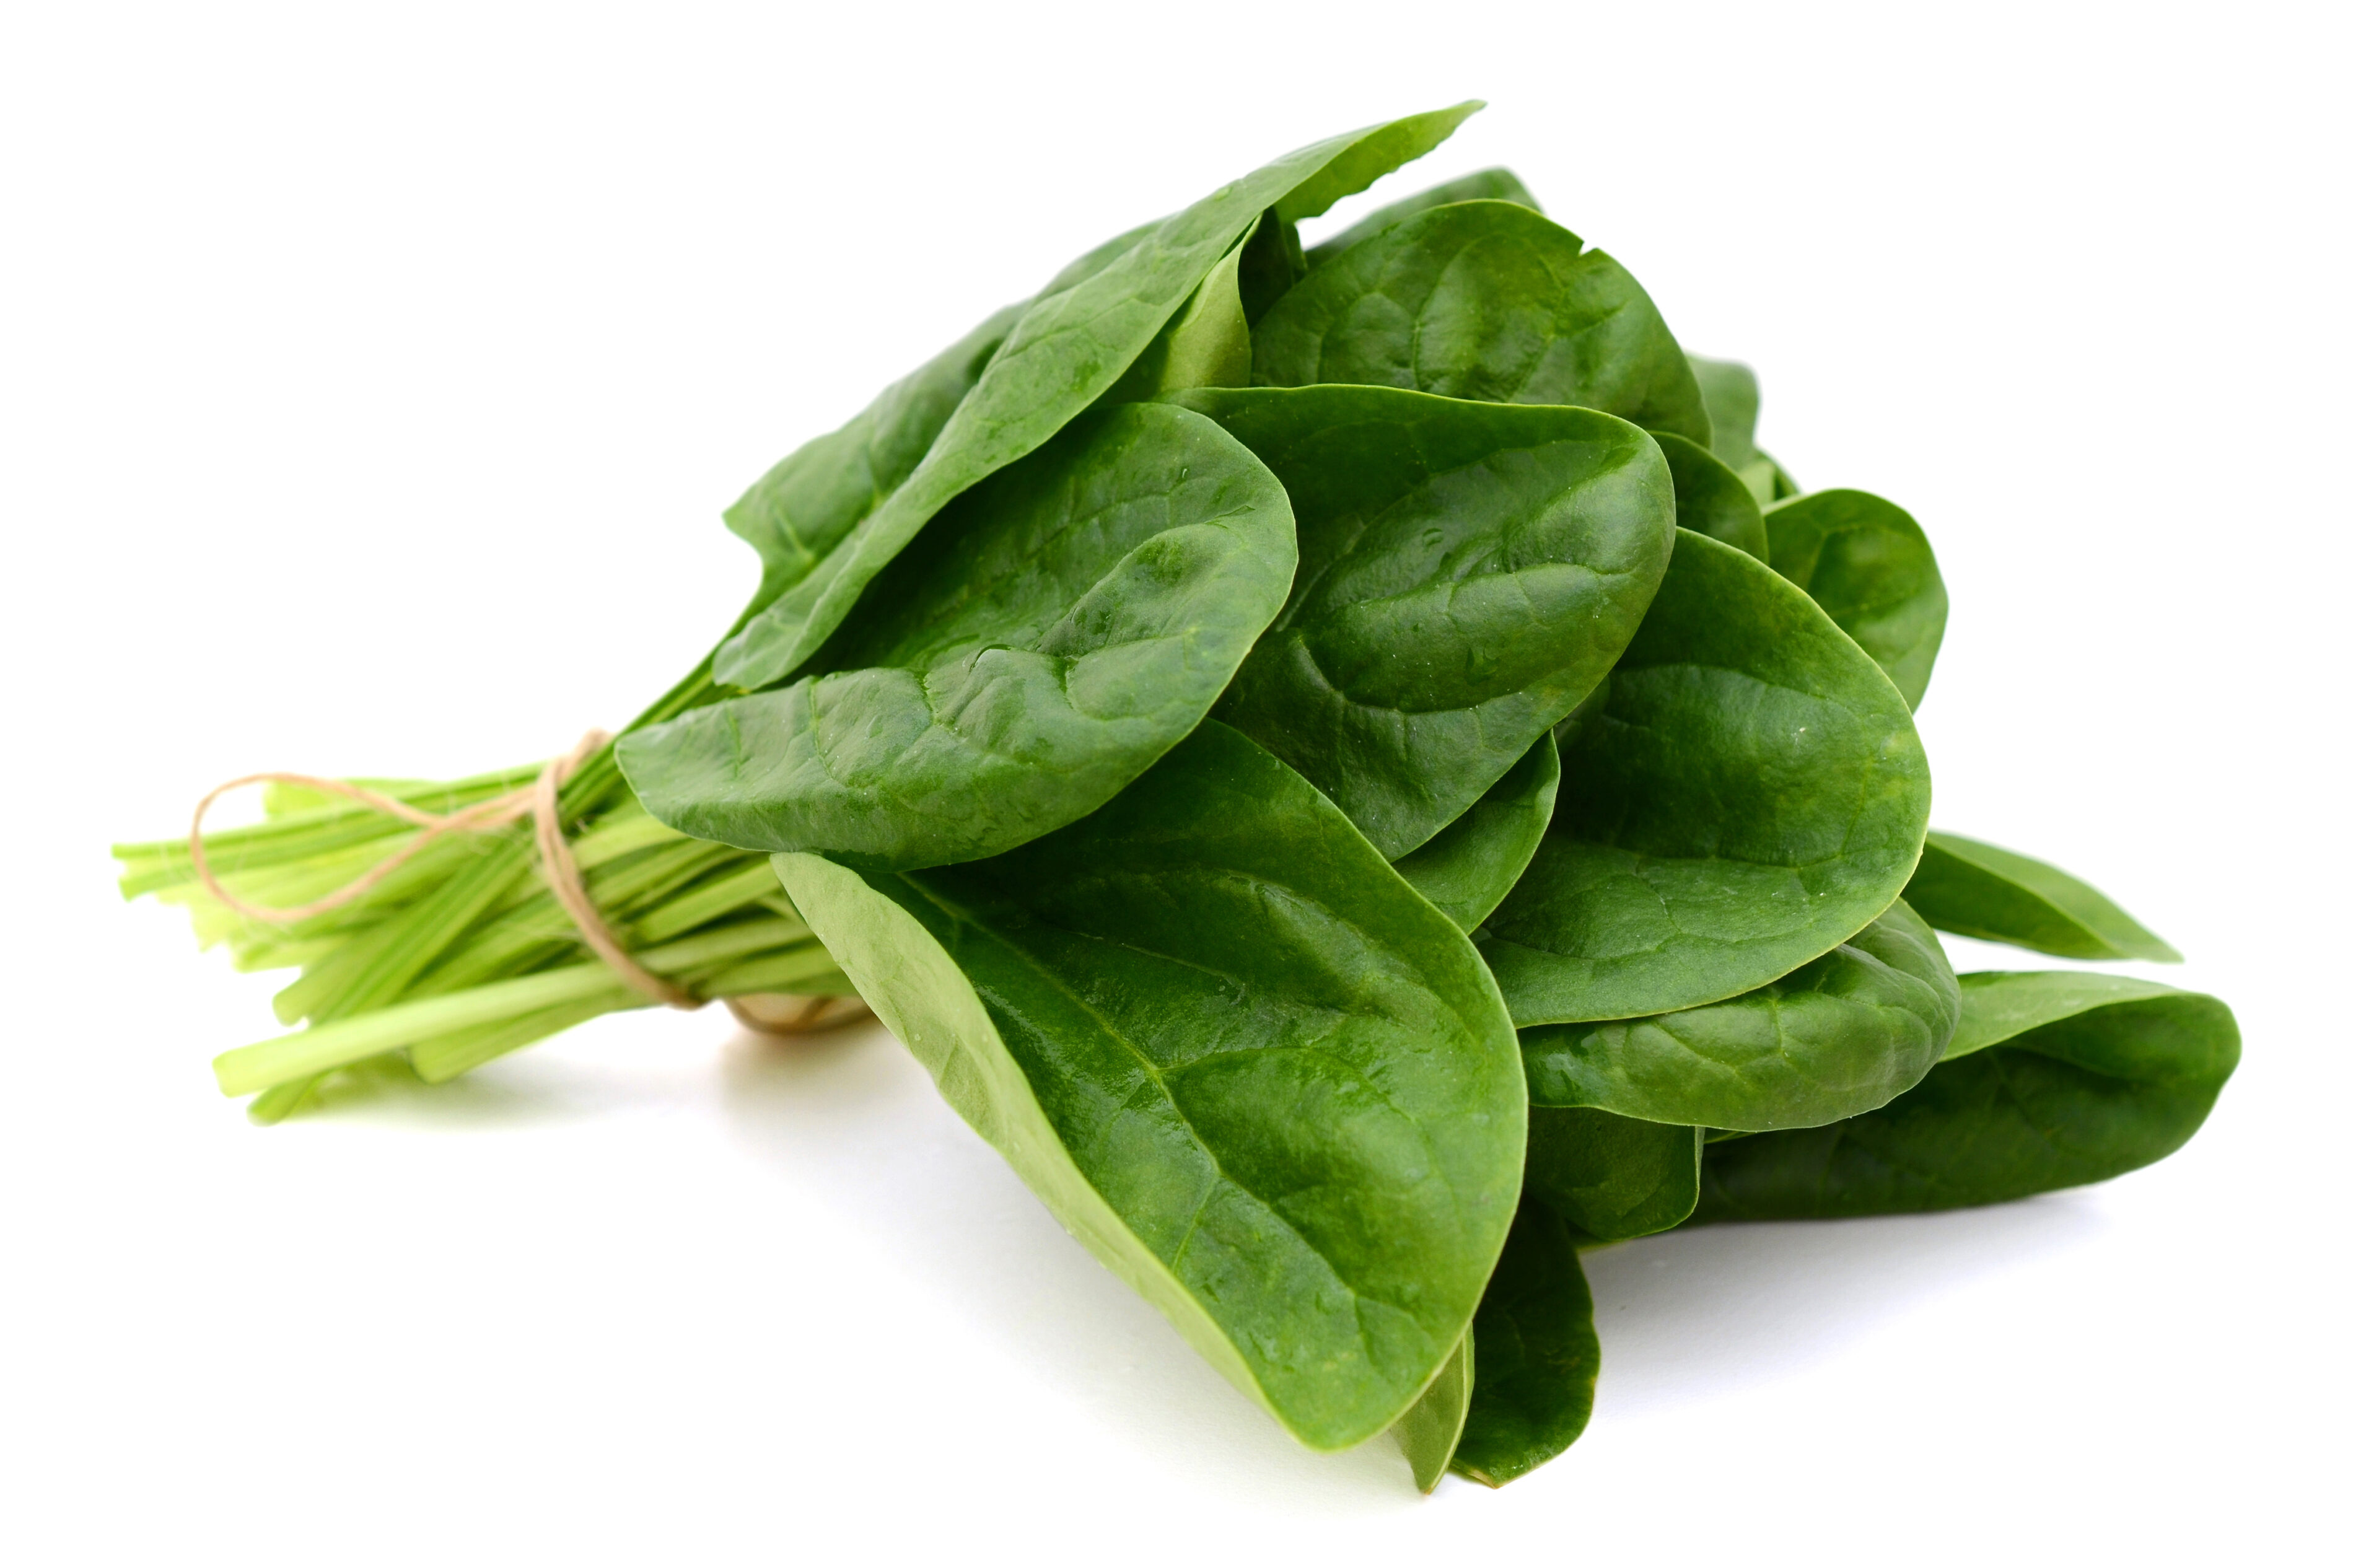 Half A Cup Of Raw Spinach 